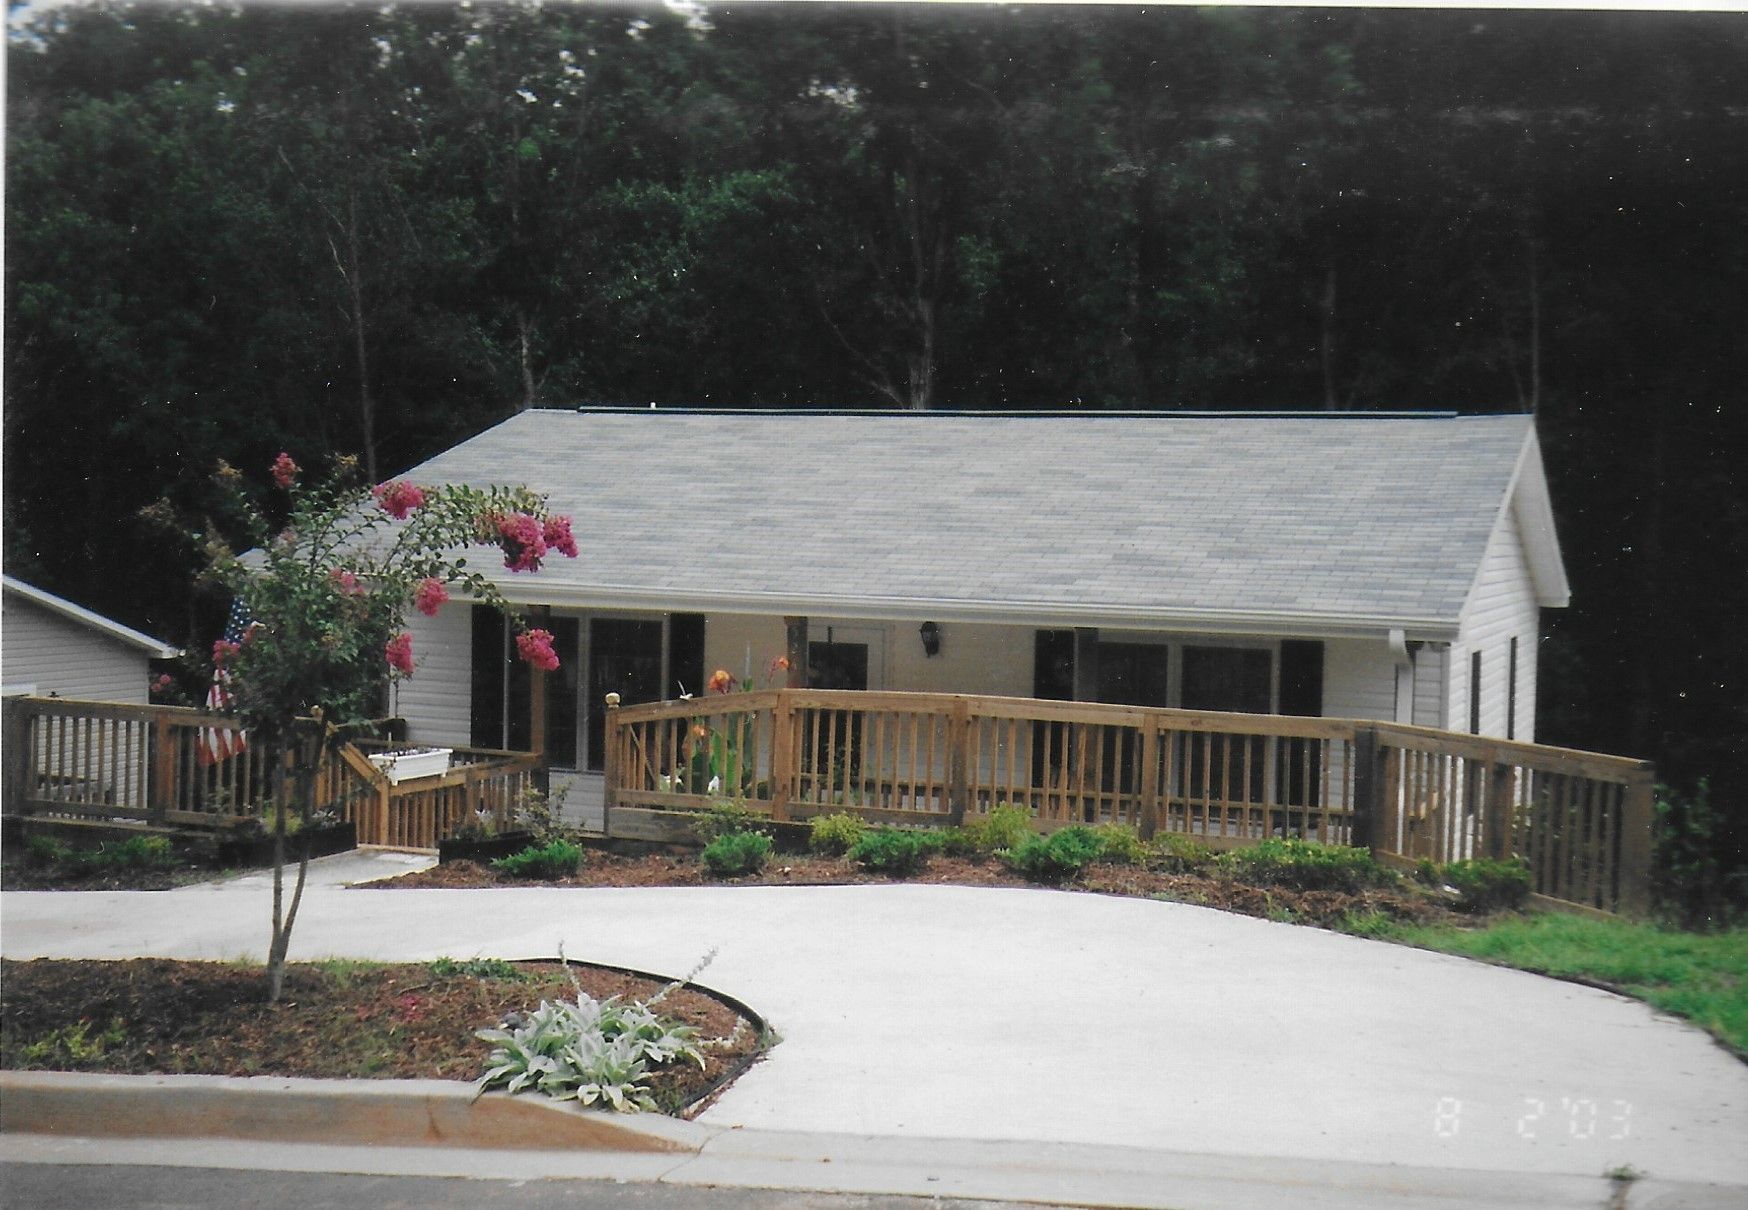 A completed Habitat home.